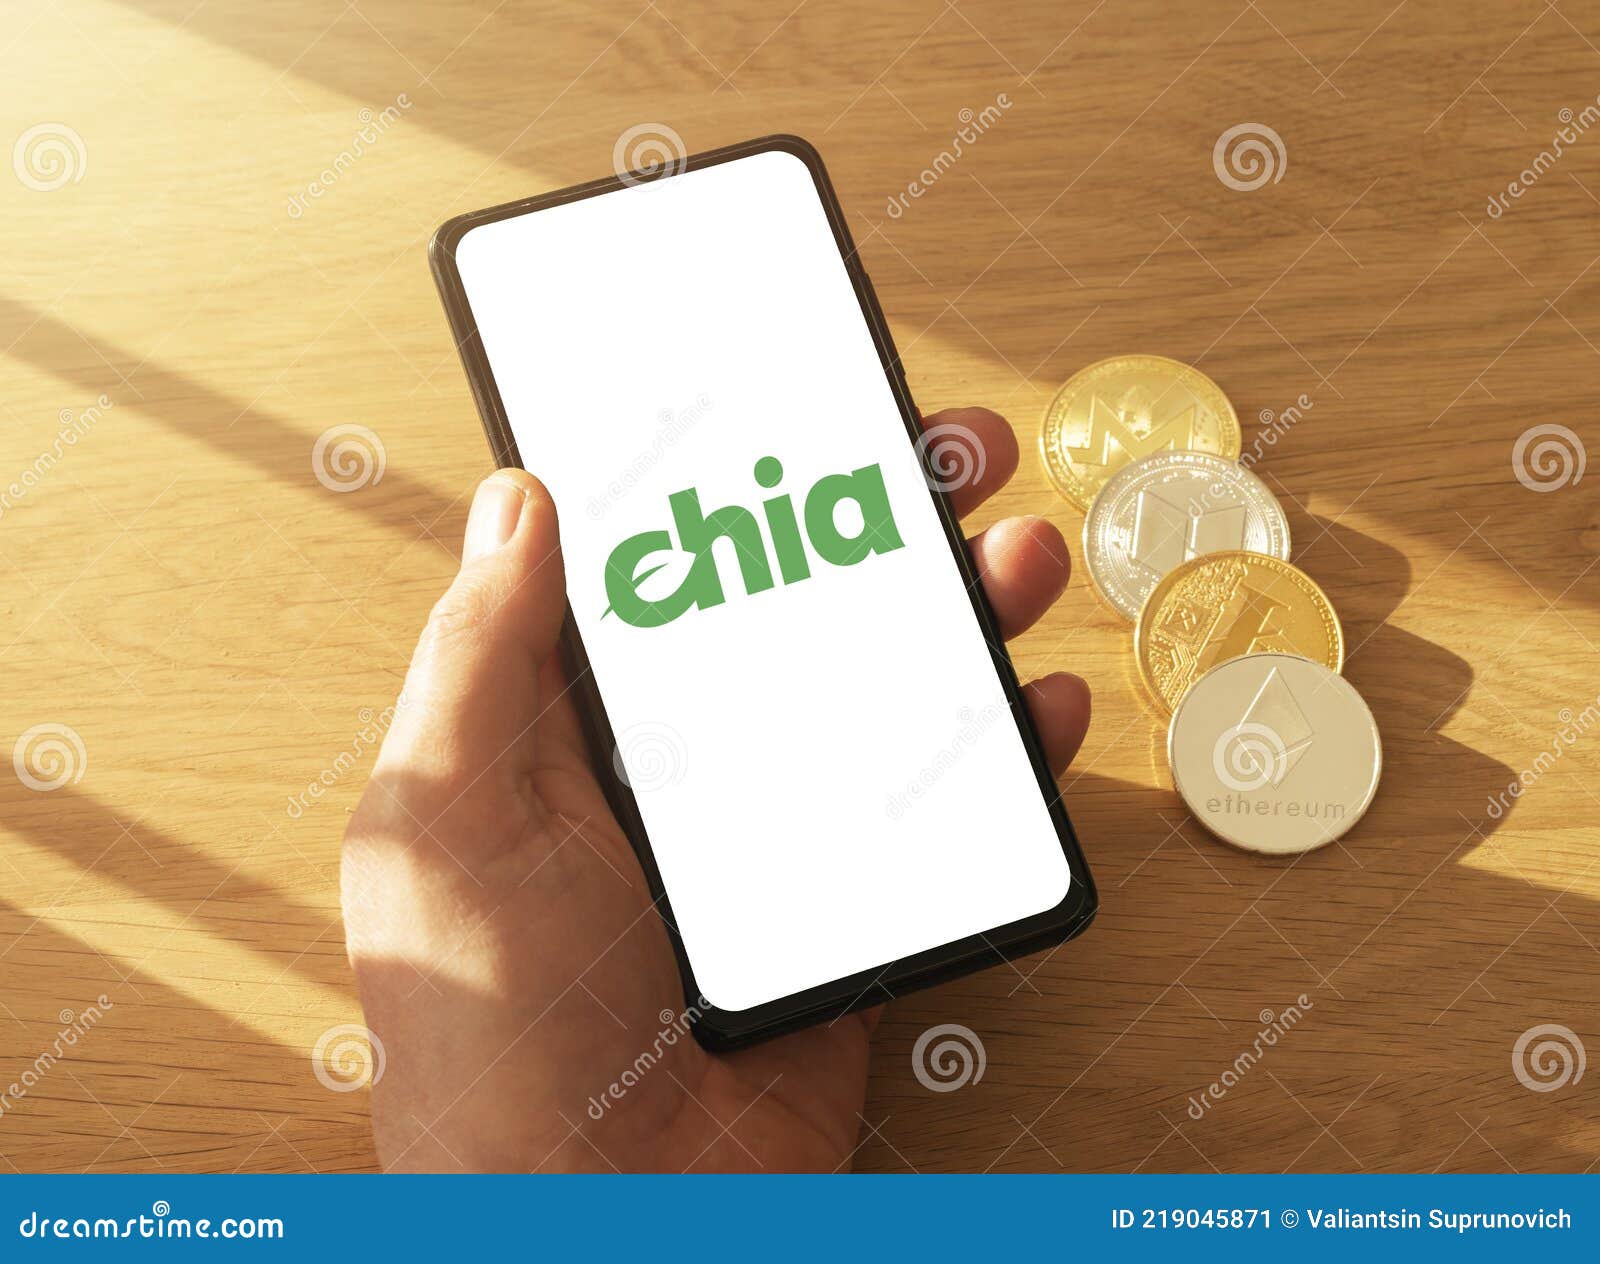 chia coin currency